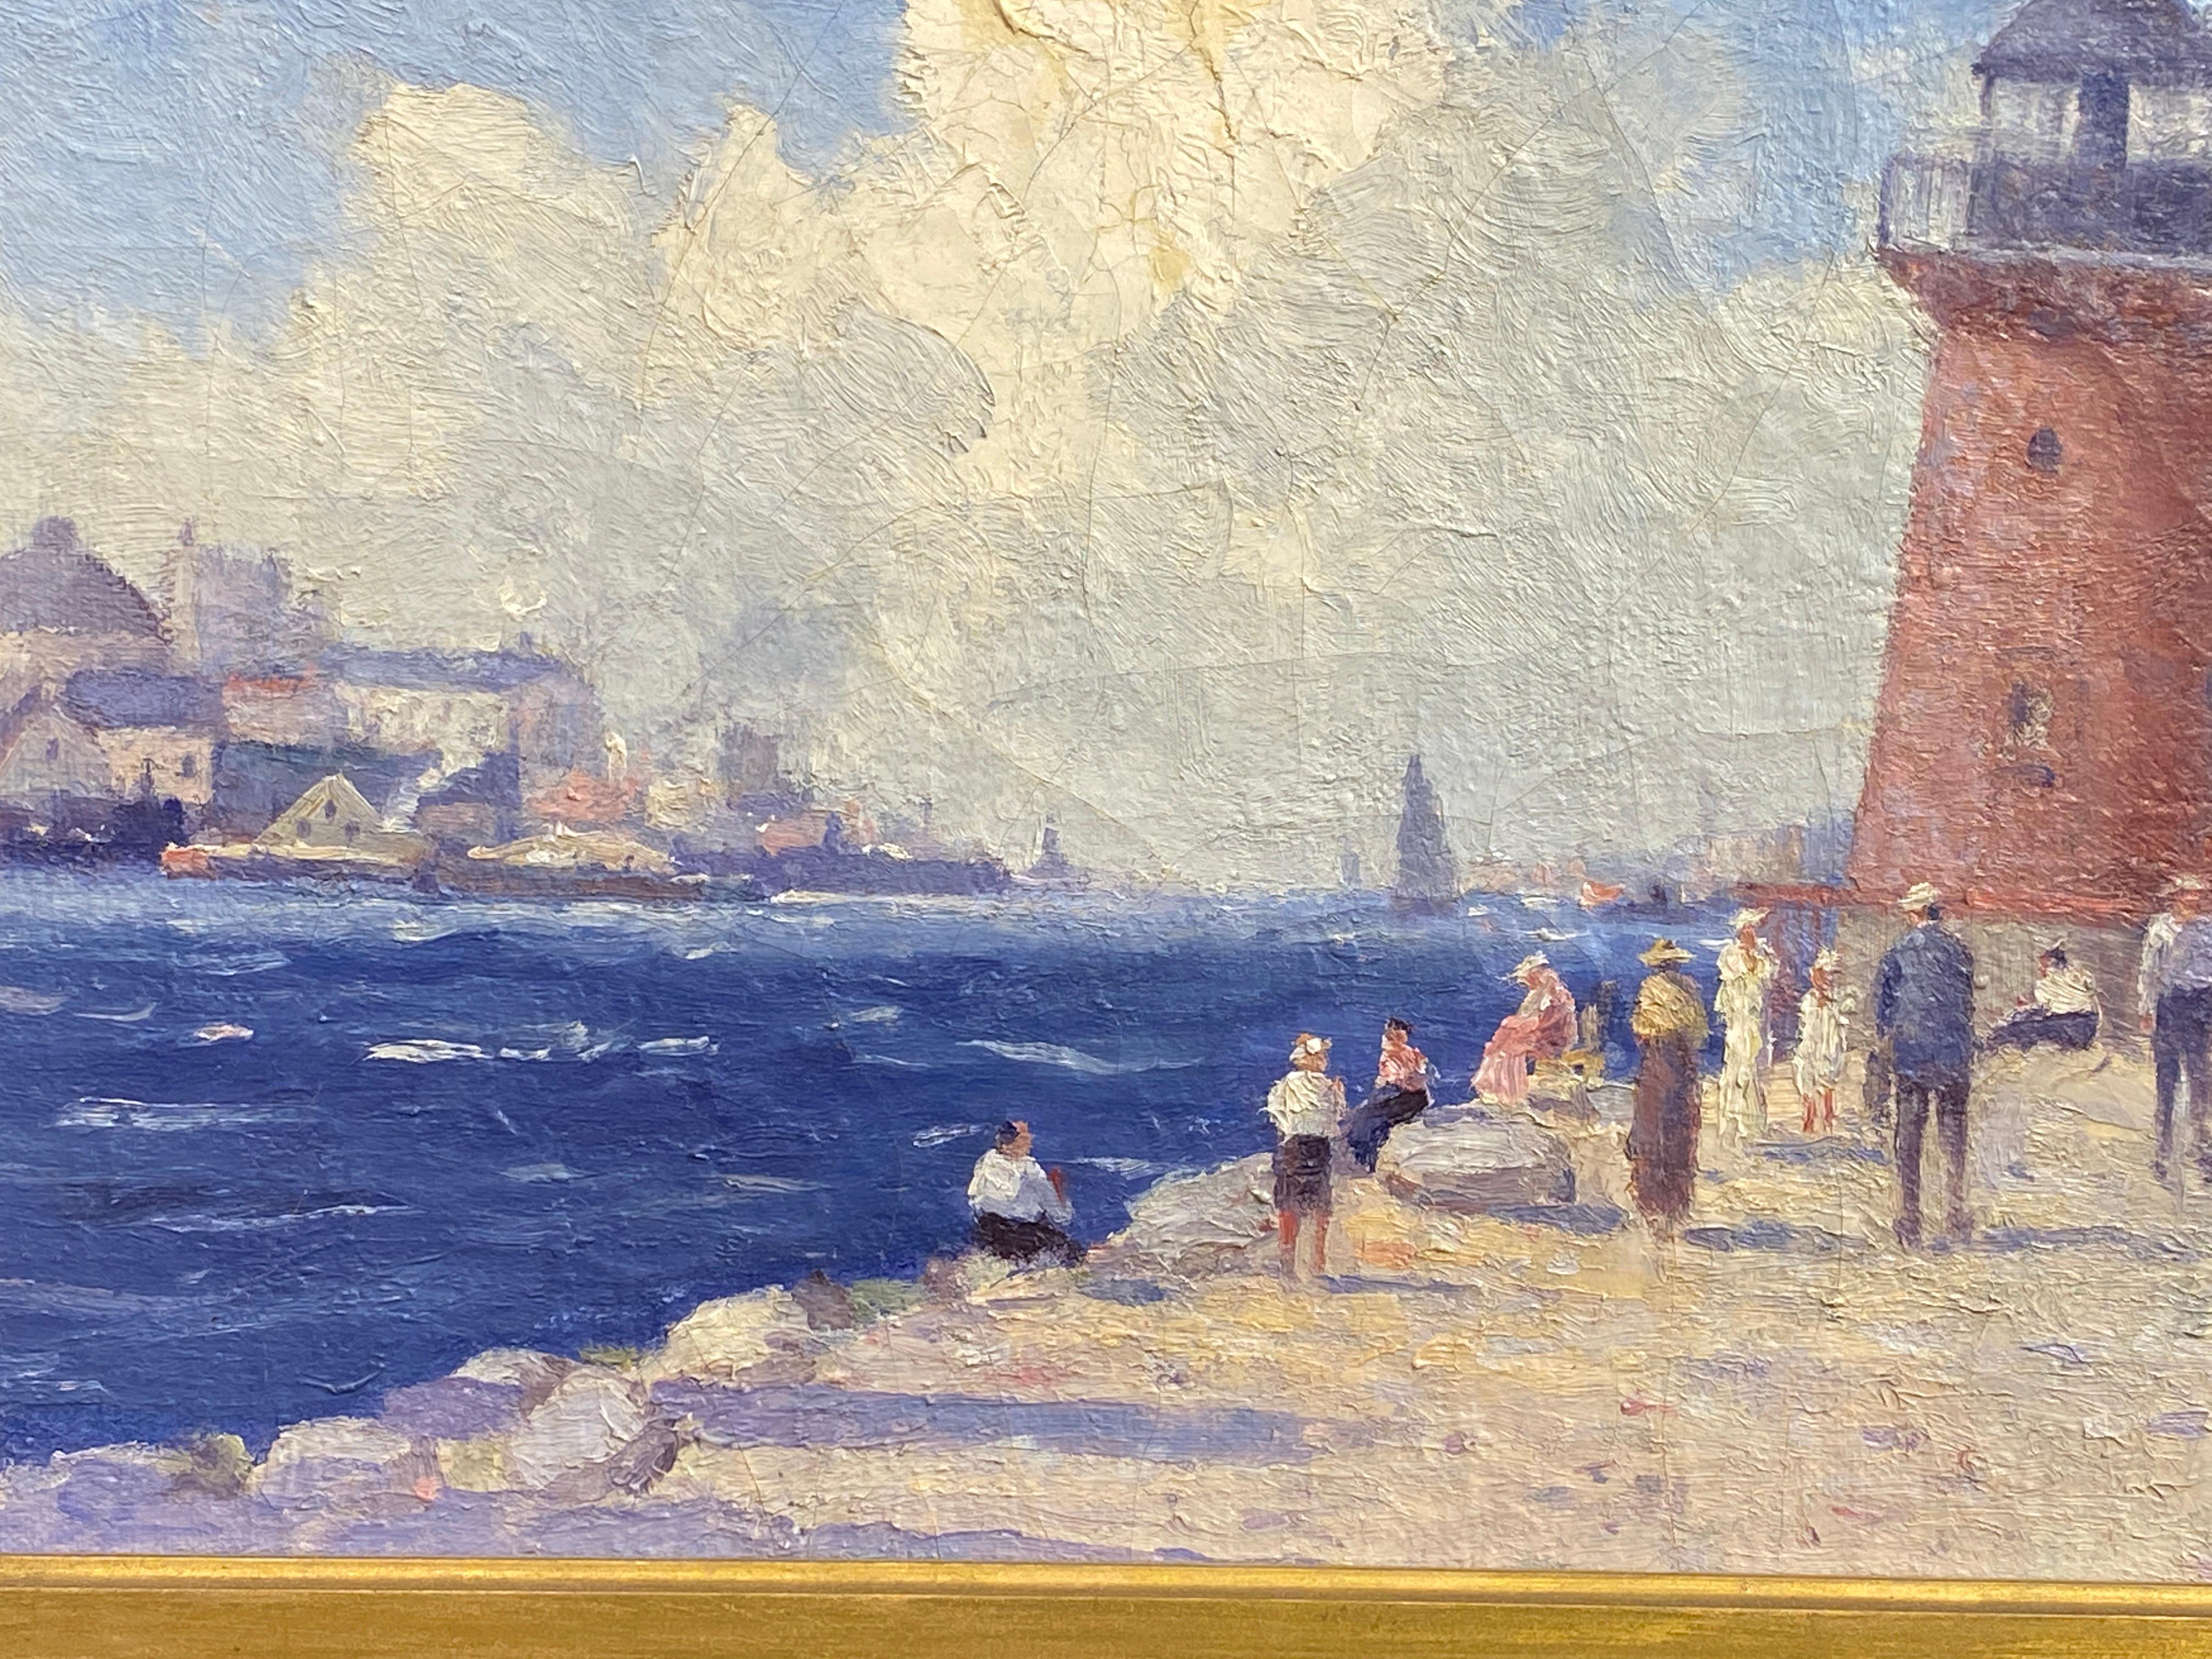 The Little Red Lighthouse, New York
By Gustave Wolff (1863-1935)
Signed Lower Right
Unframed: 14